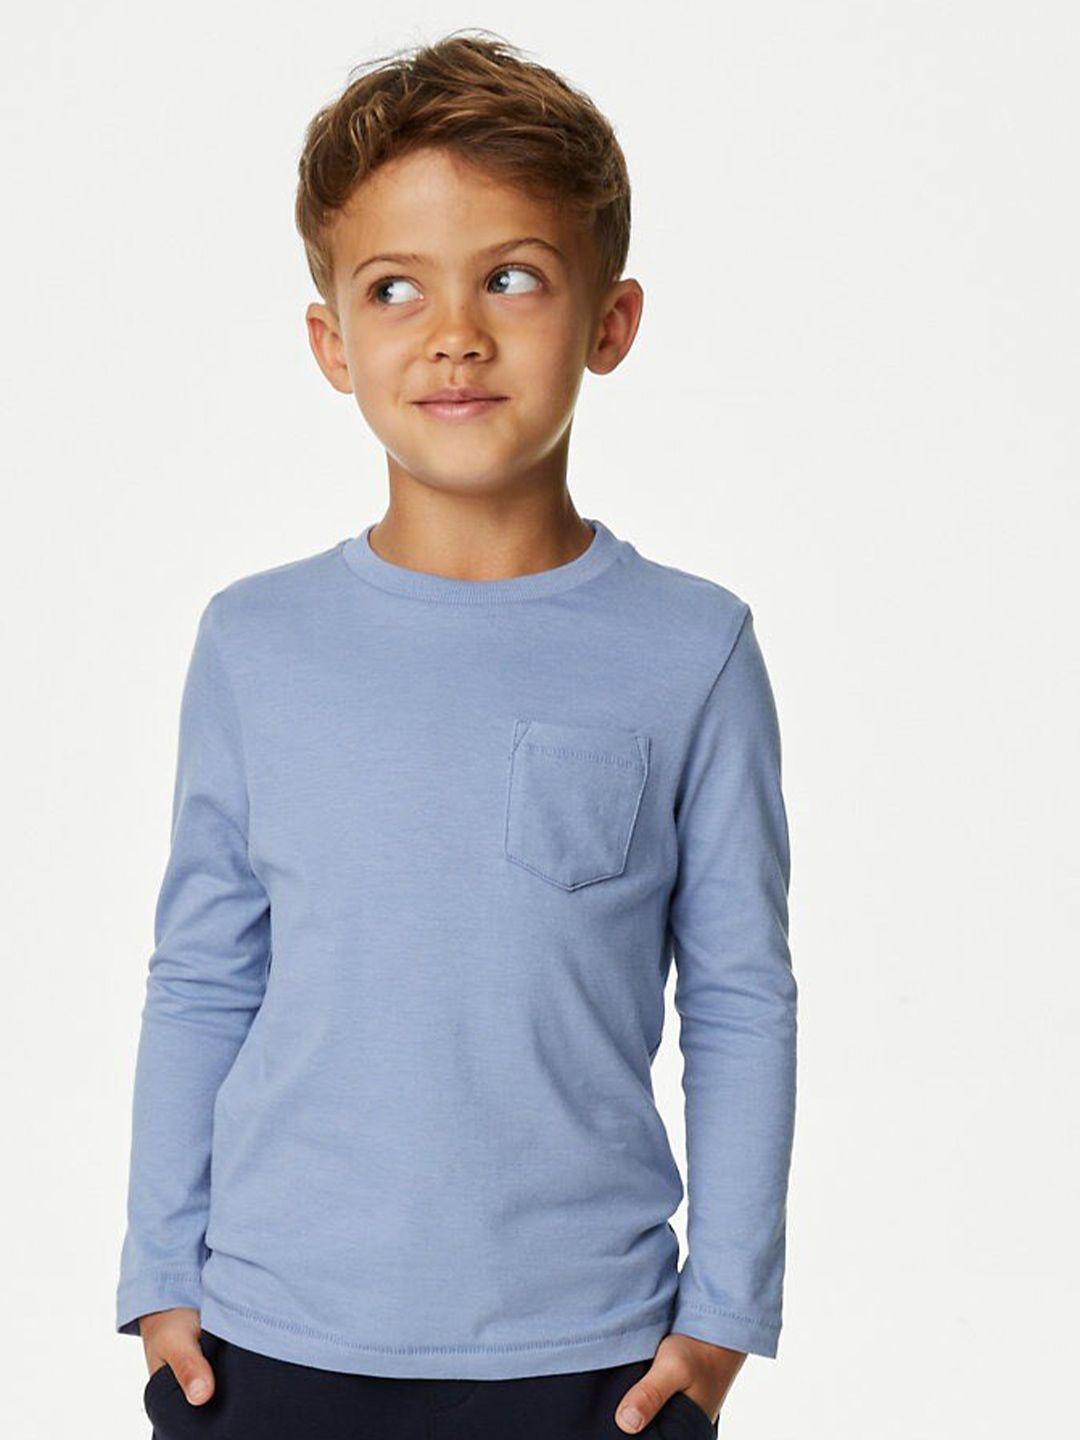 marks & spencer boys pure cotton t-shirt